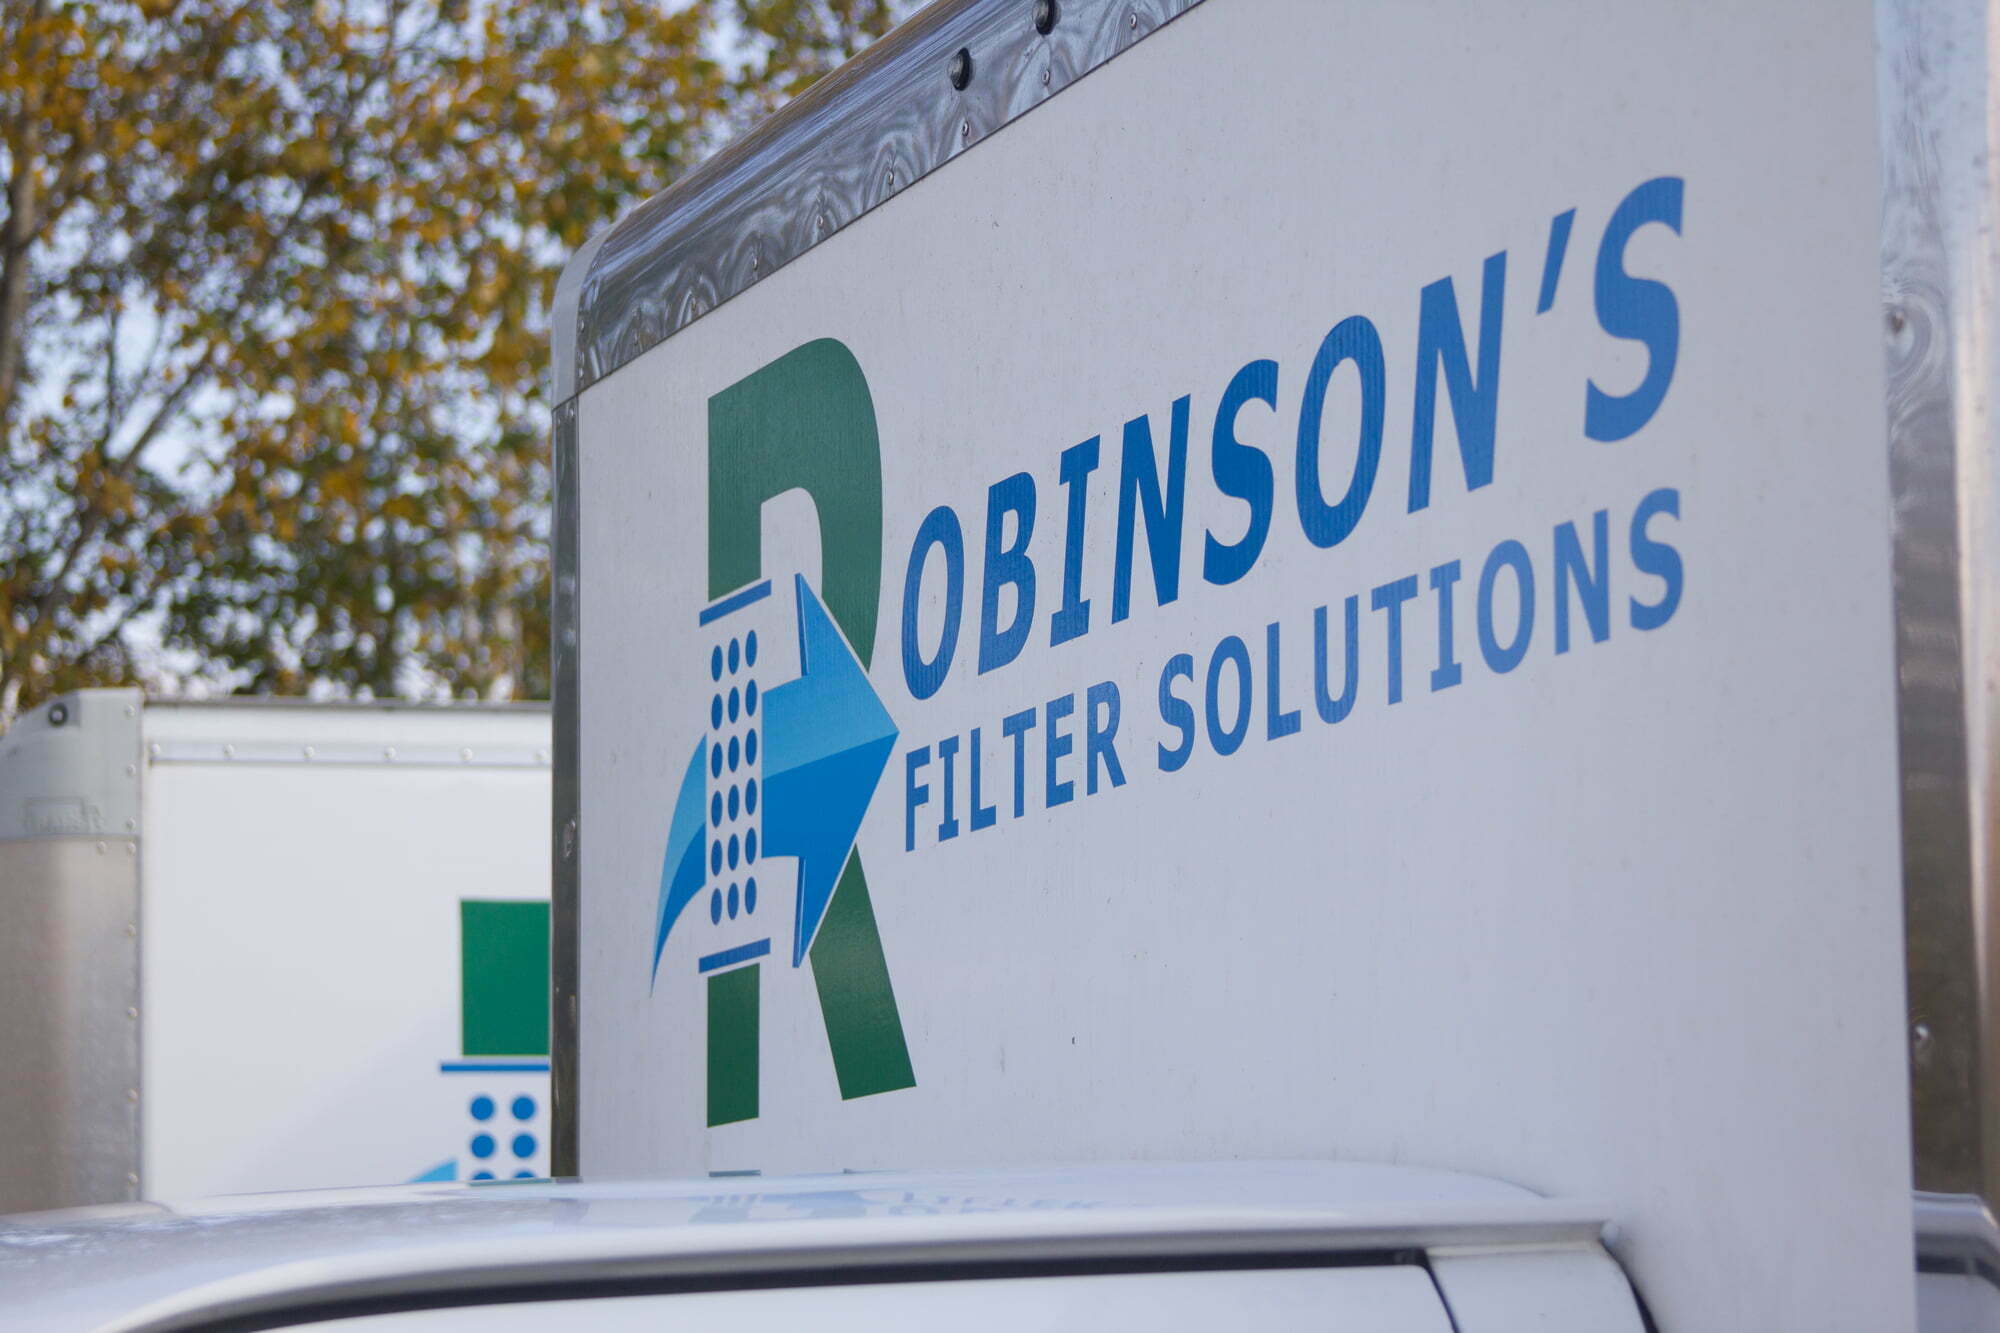 Industrial air filter cleaning and sales van with robinsons-fs.com printed on the back. 